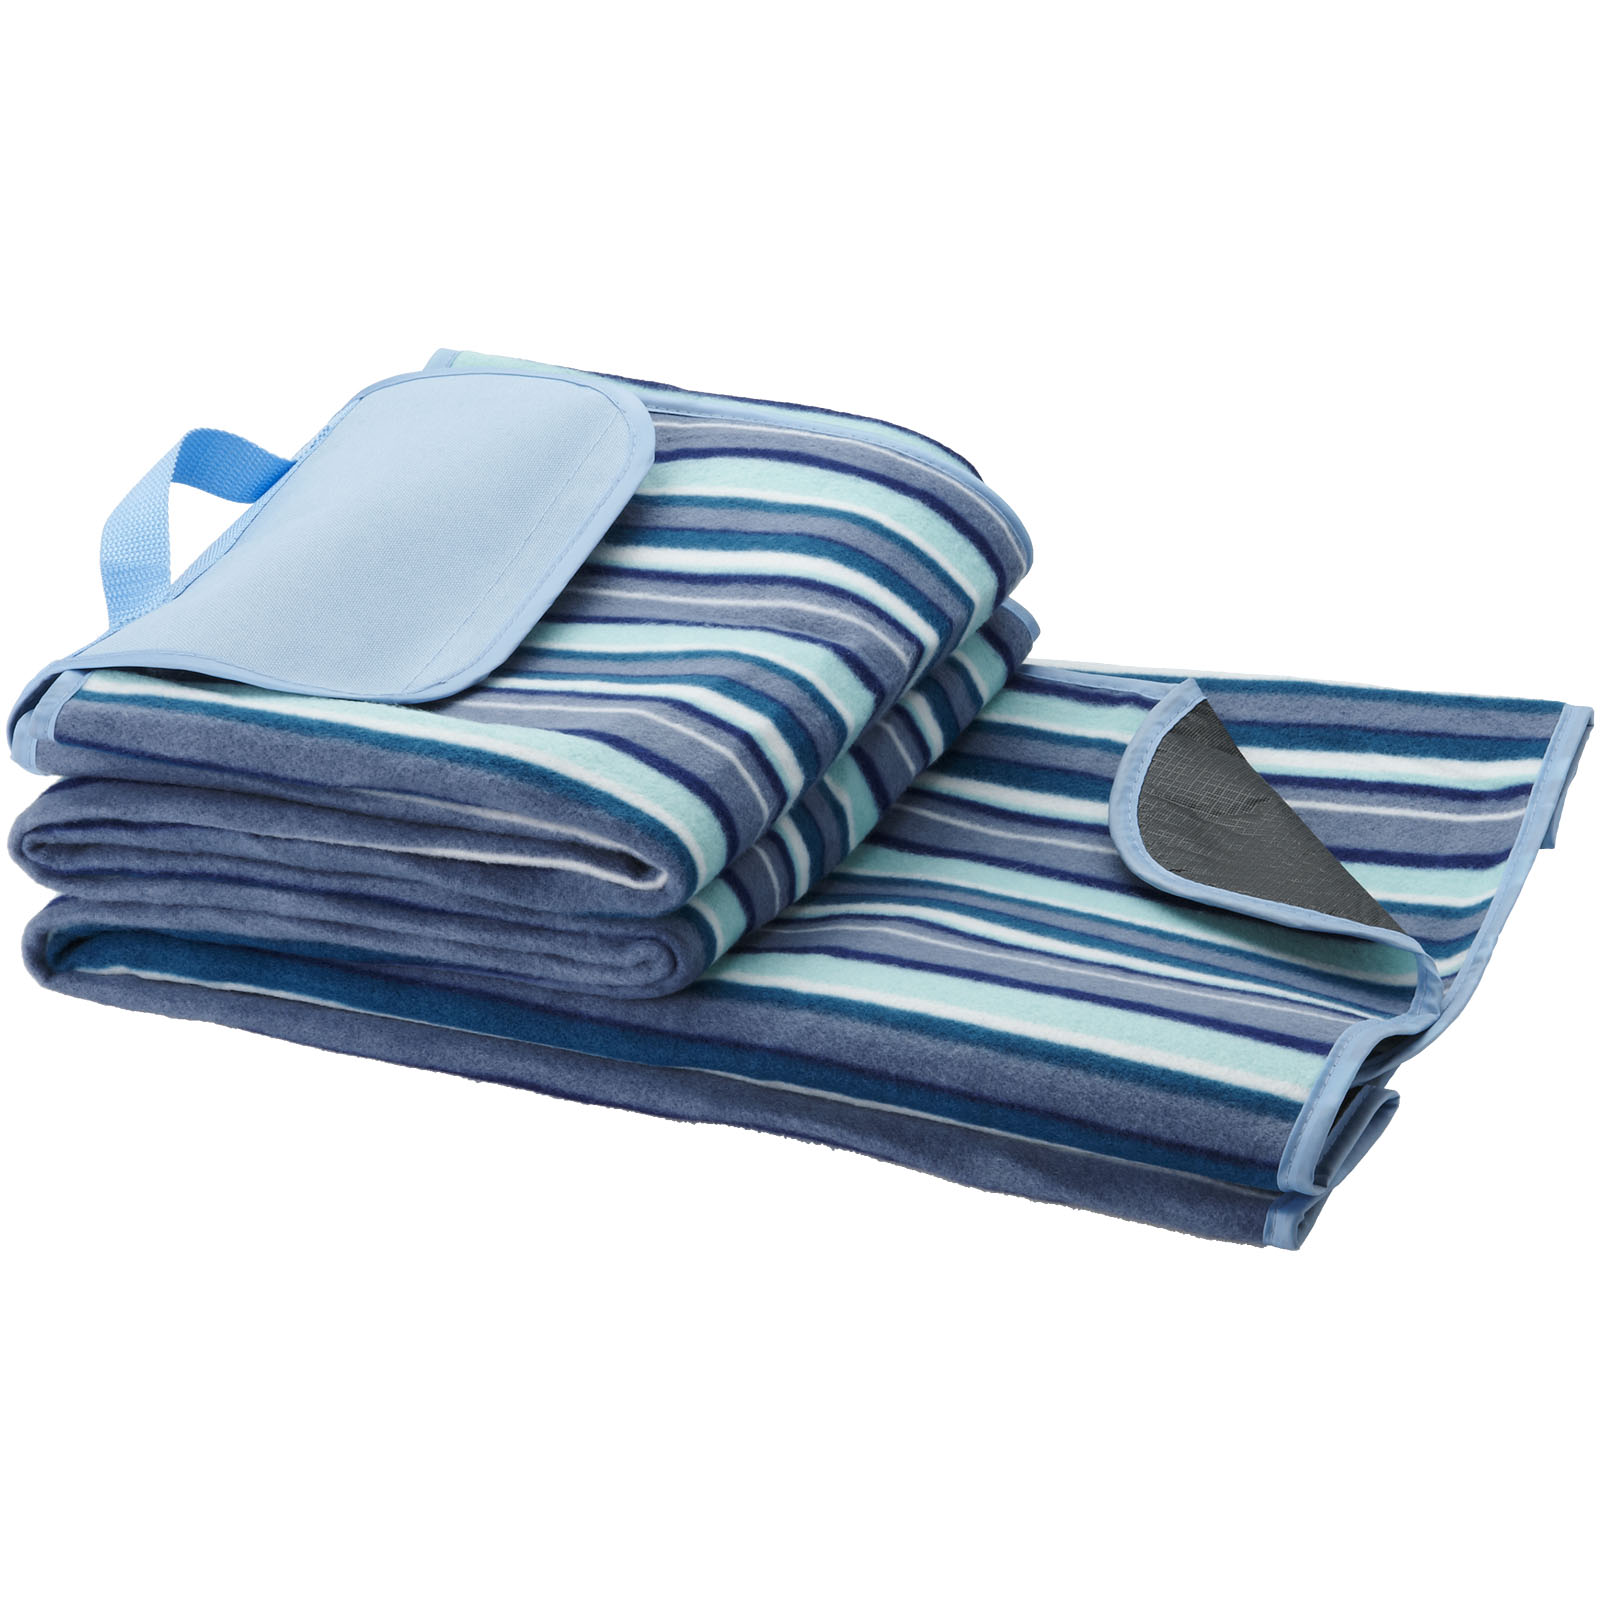 Advertising Picnic Accessories - Riviera water-resistant outdoor picnic blanket